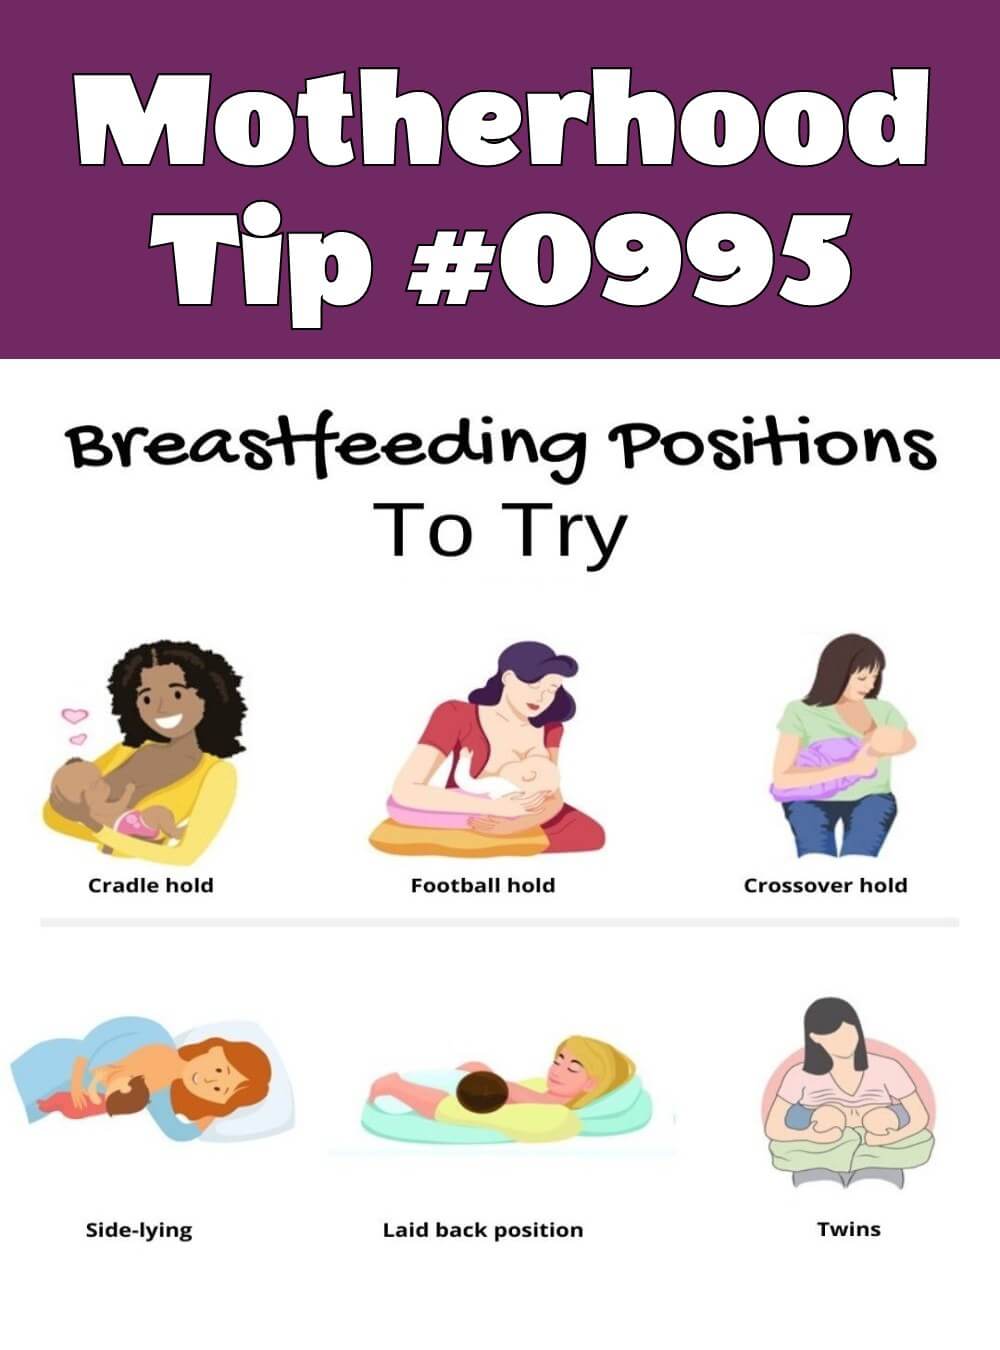 Parenting and Pregnancy Infographic | Motherhood Tip #0995